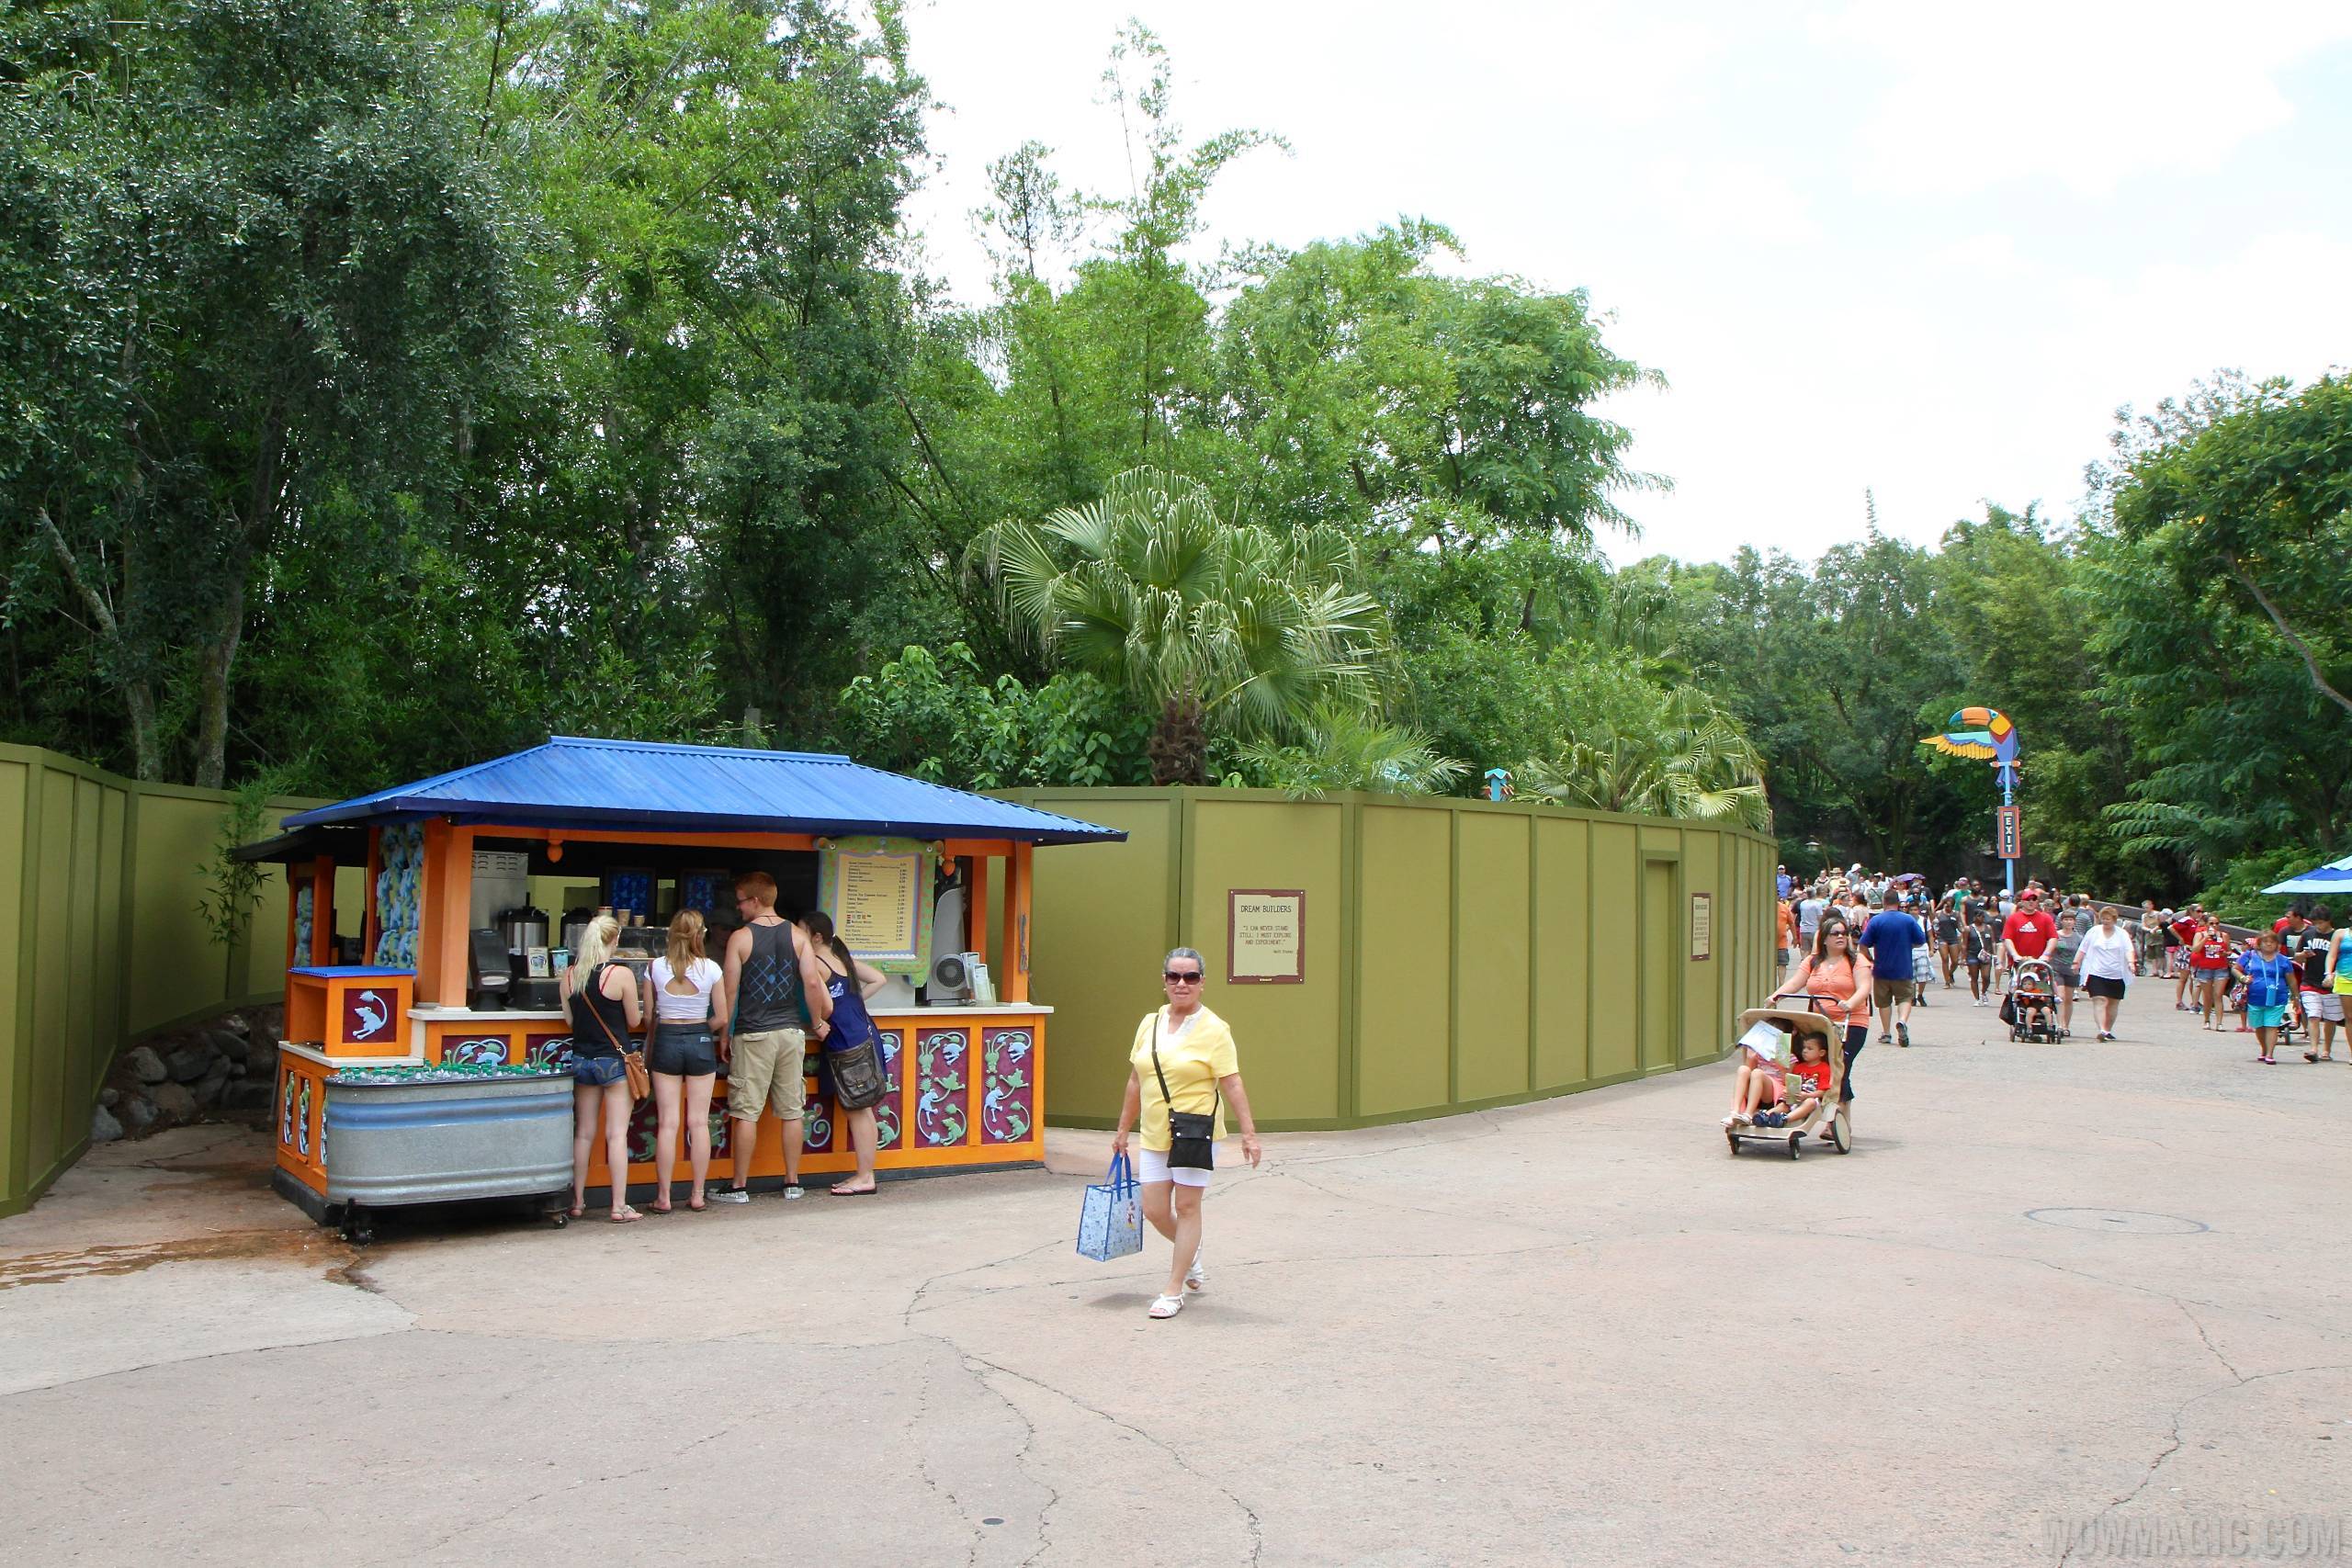 PHOTOS - Construction walls up around Disney Outfitters at Disney's Animal Kingdom as expansion gets underway